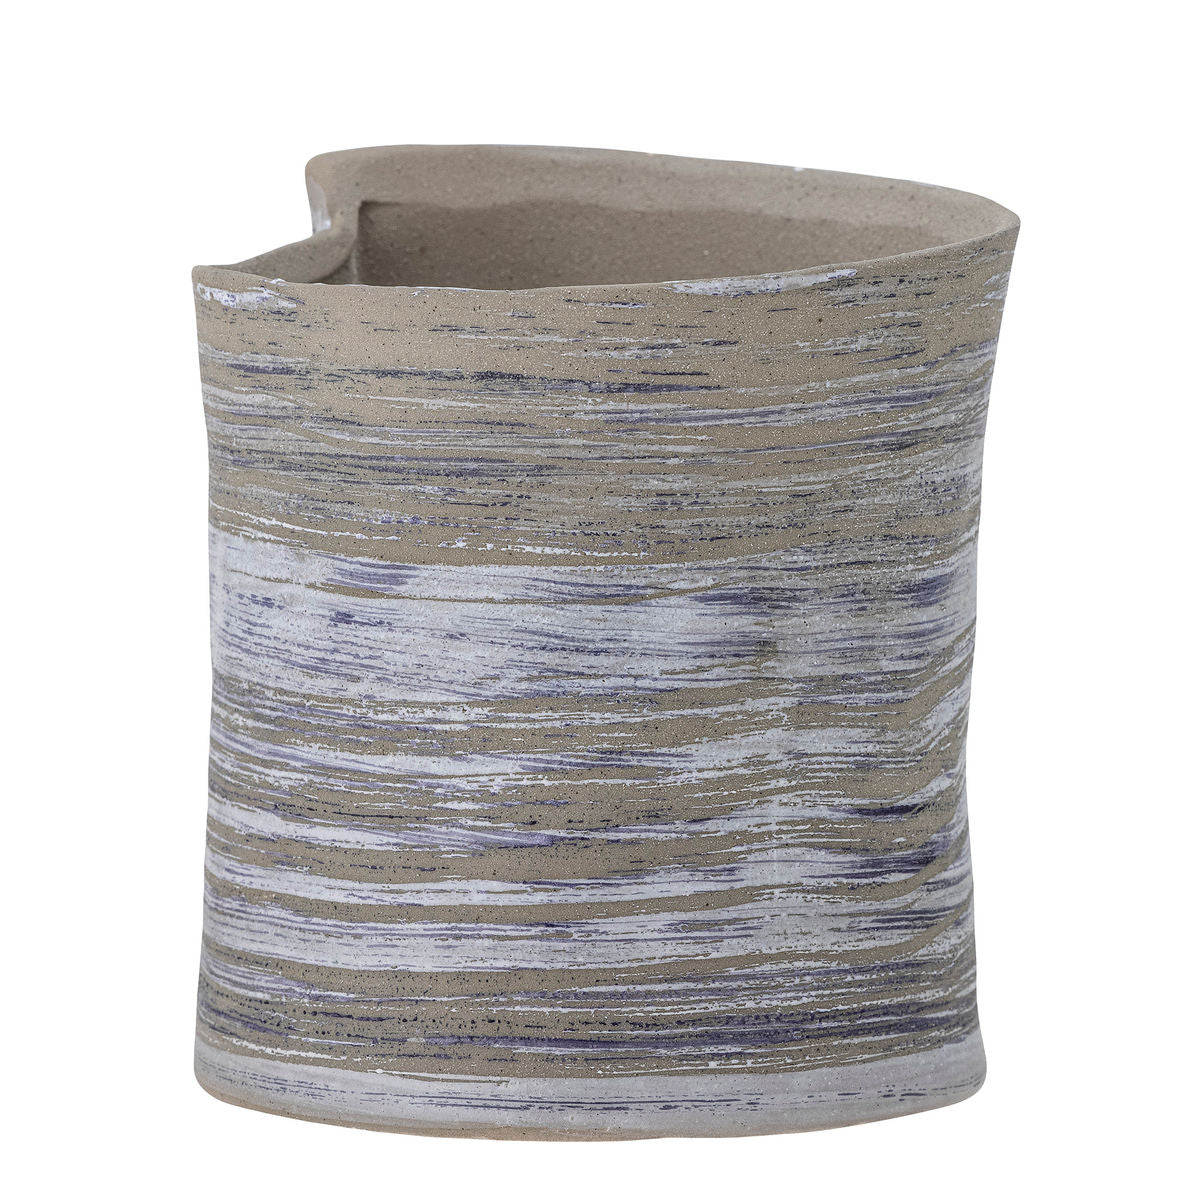 Bloomingville Adelle Herbal Potted Hids, Gray, Stoneware